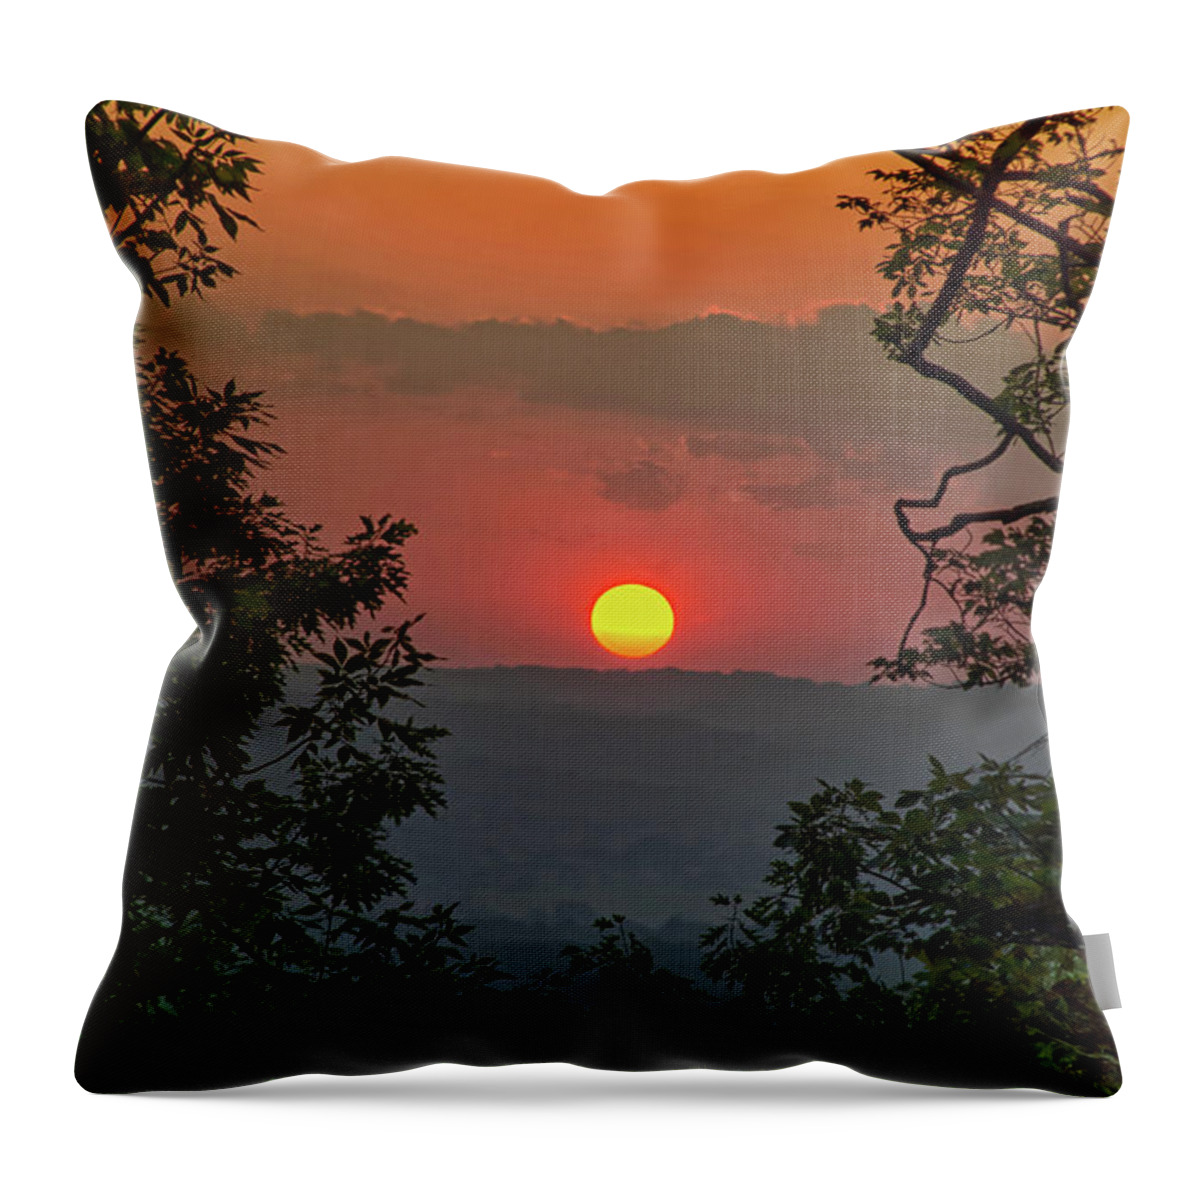 Sunset Throw Pillow featuring the photograph Golden Glow Sunset Landscape by Christina Rollo